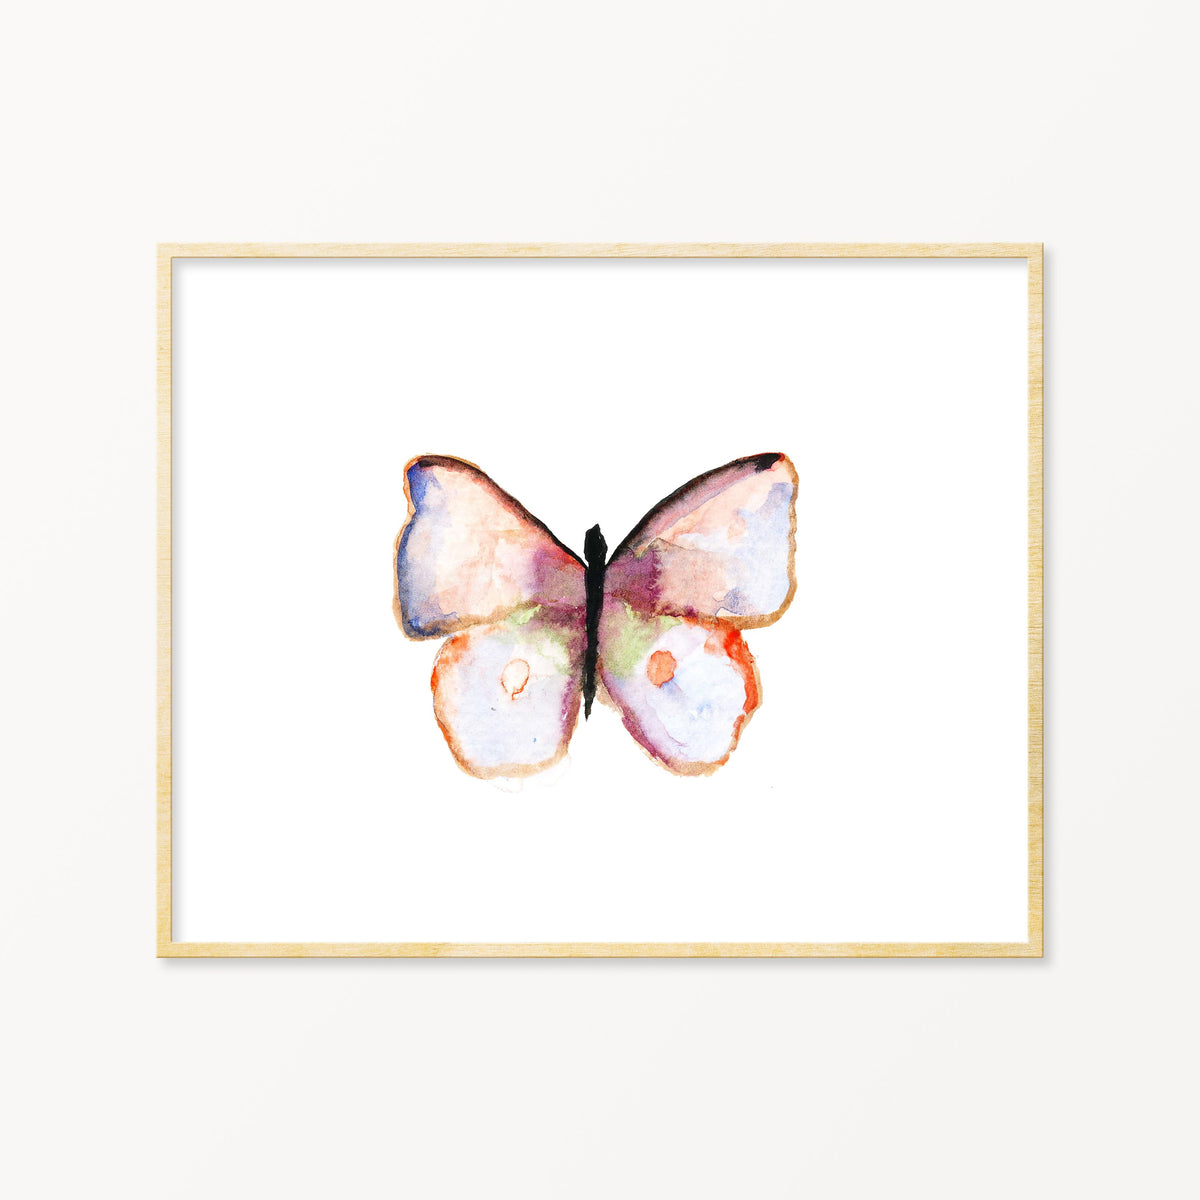 Lone Butterfly No. 1